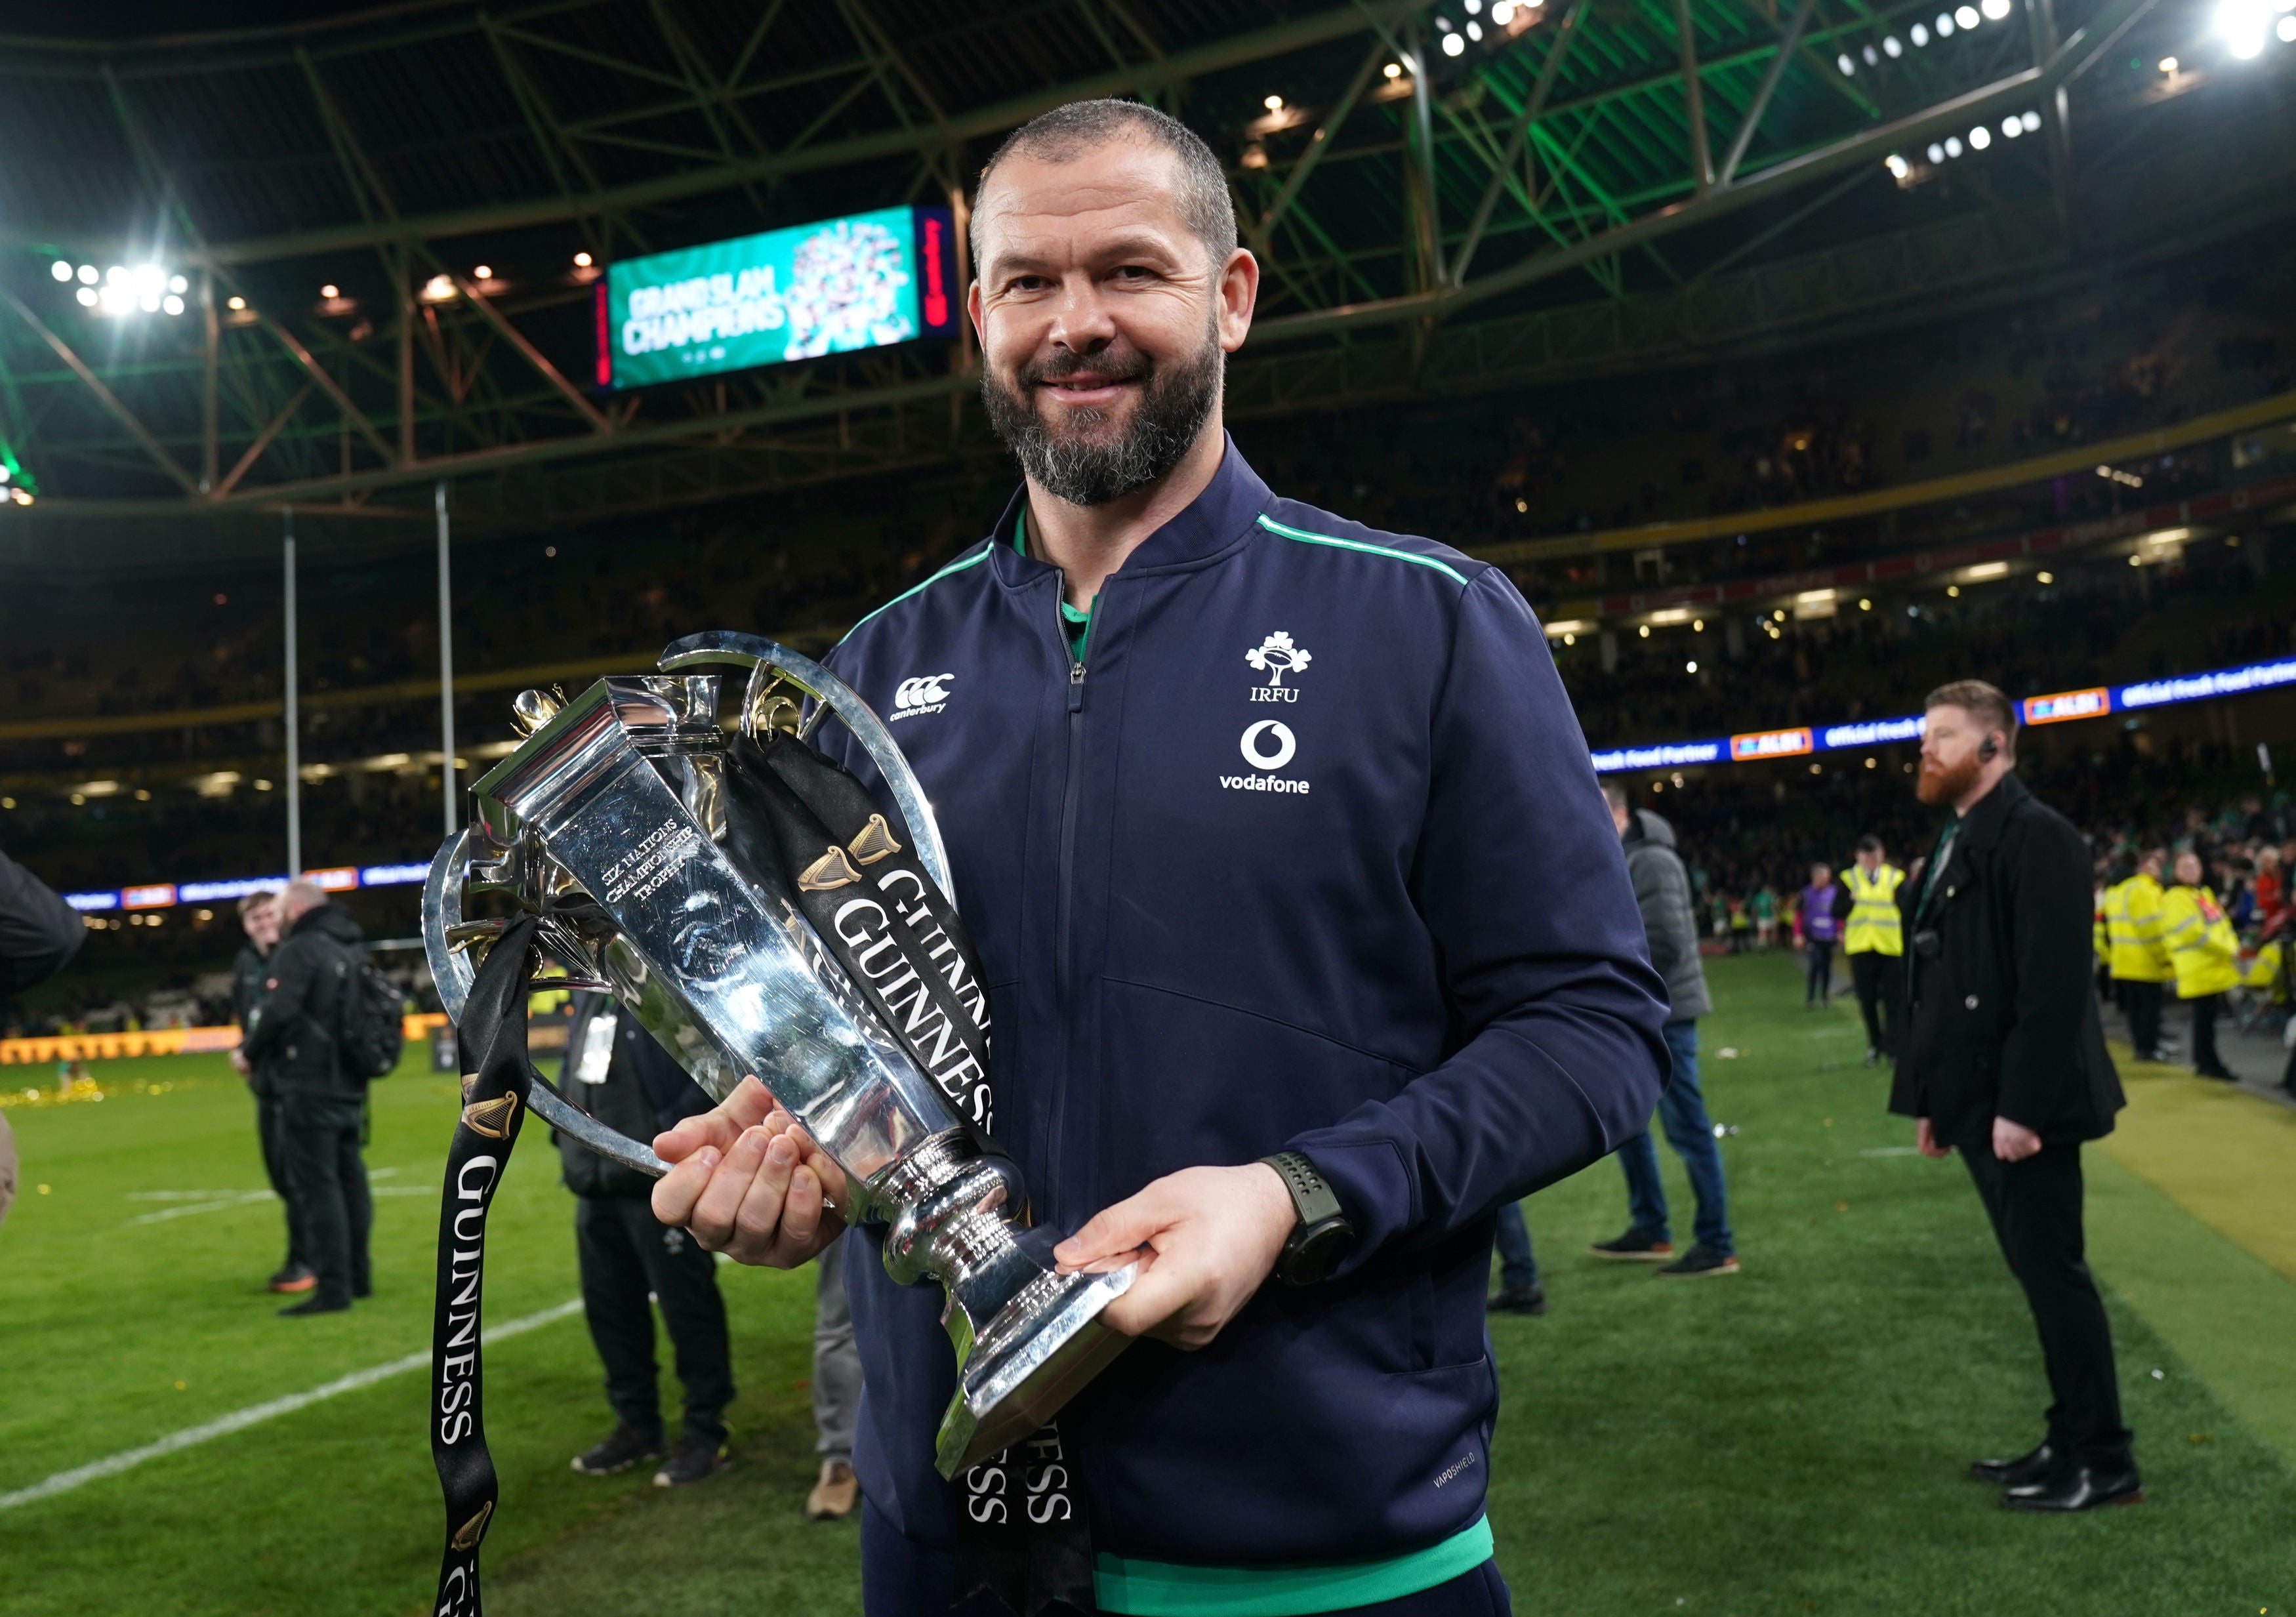 Andy Farrell celebrated leading Ireland to a Six Nations grand slam